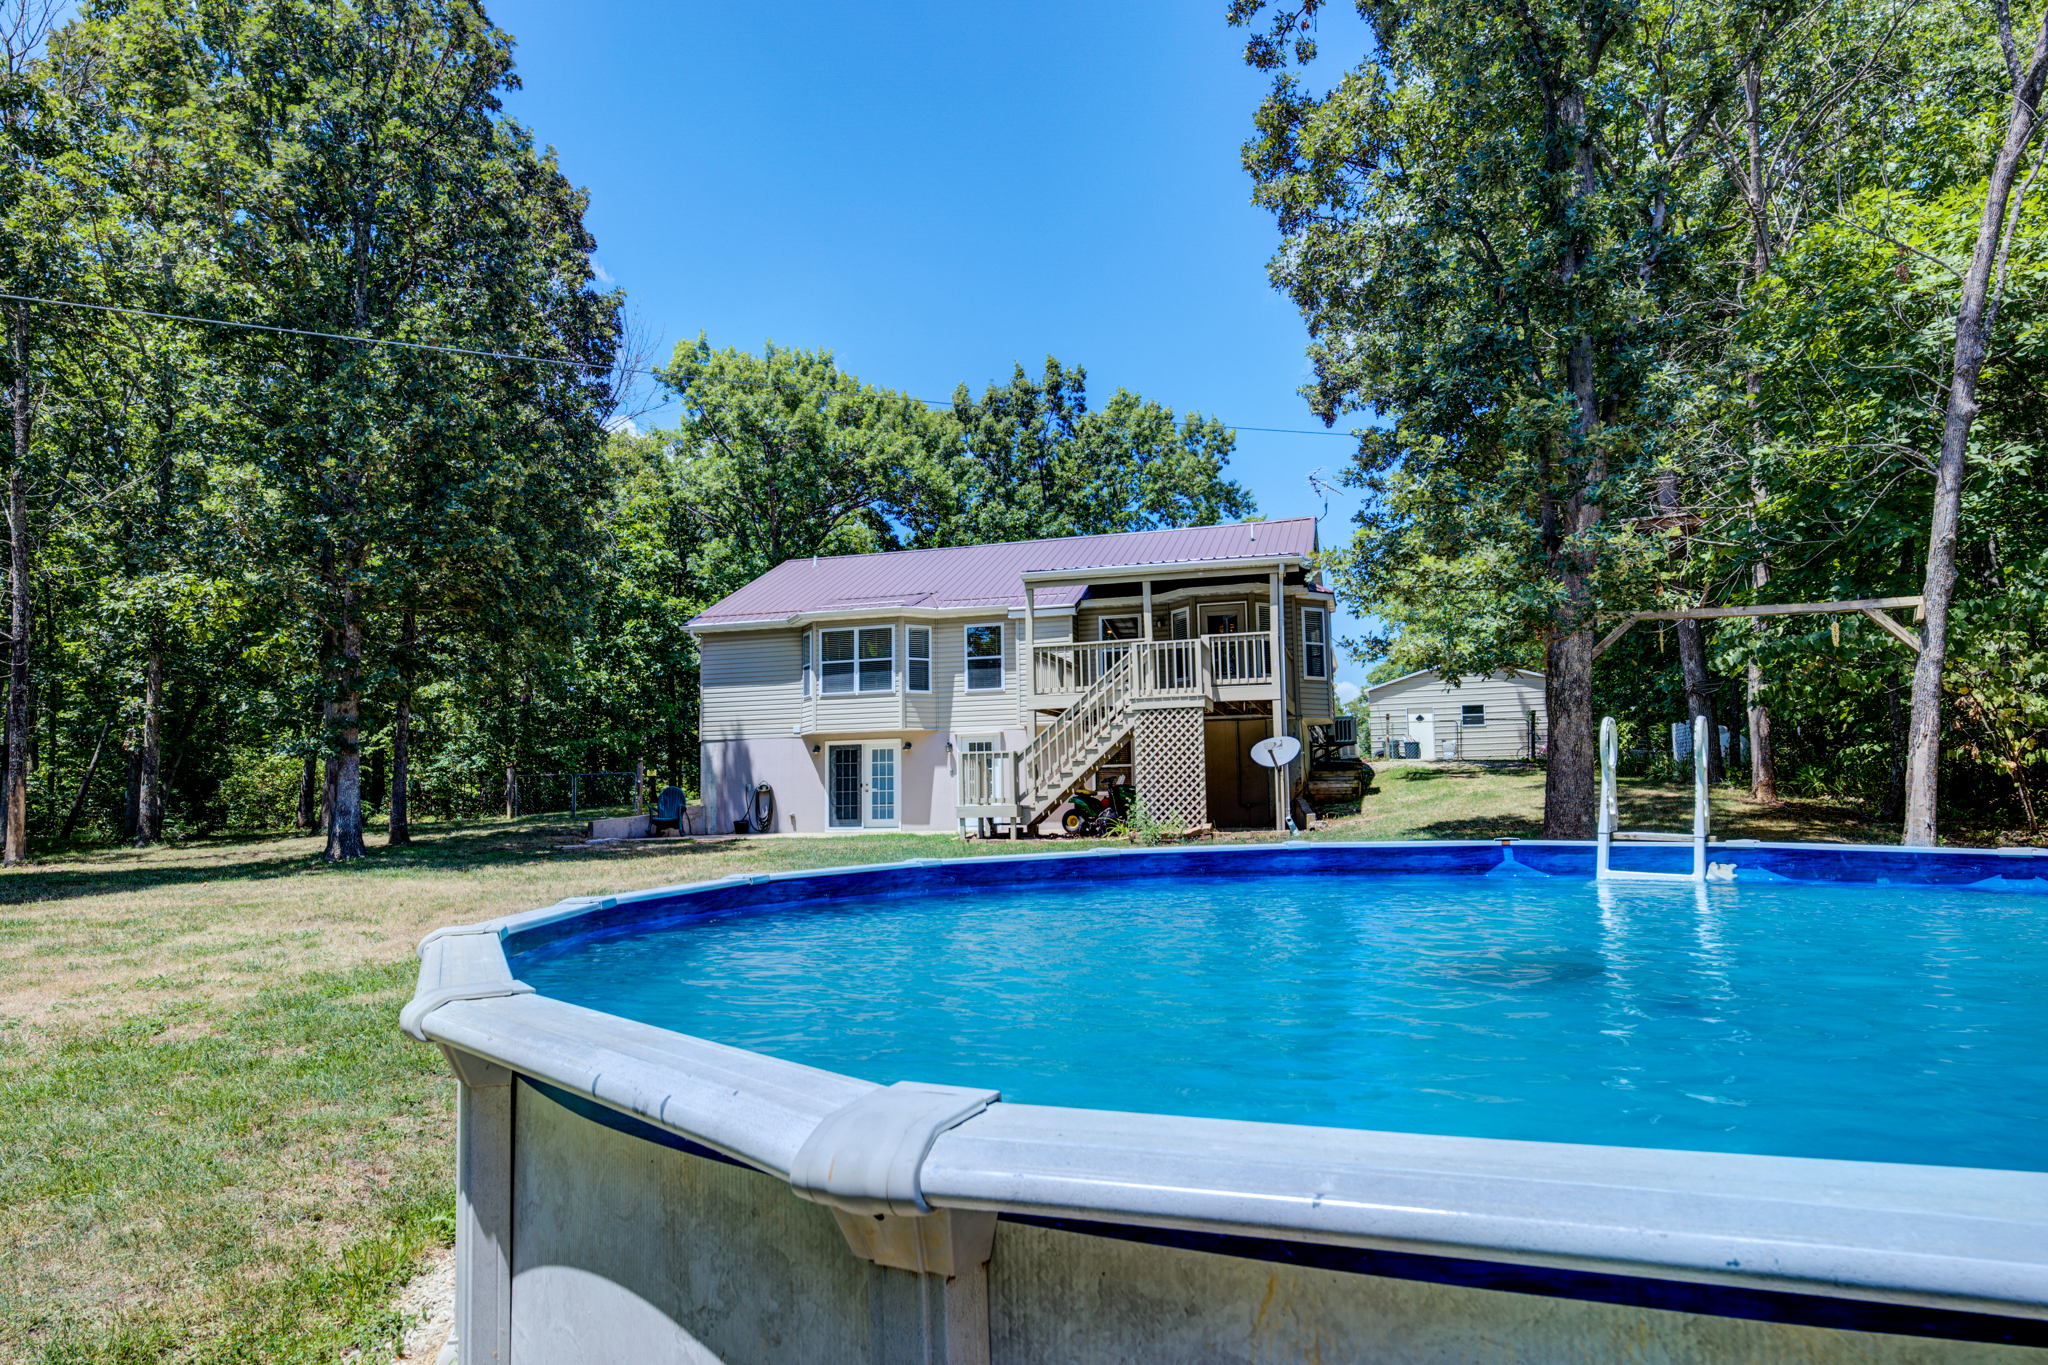 19 Ext Pool and Rear House